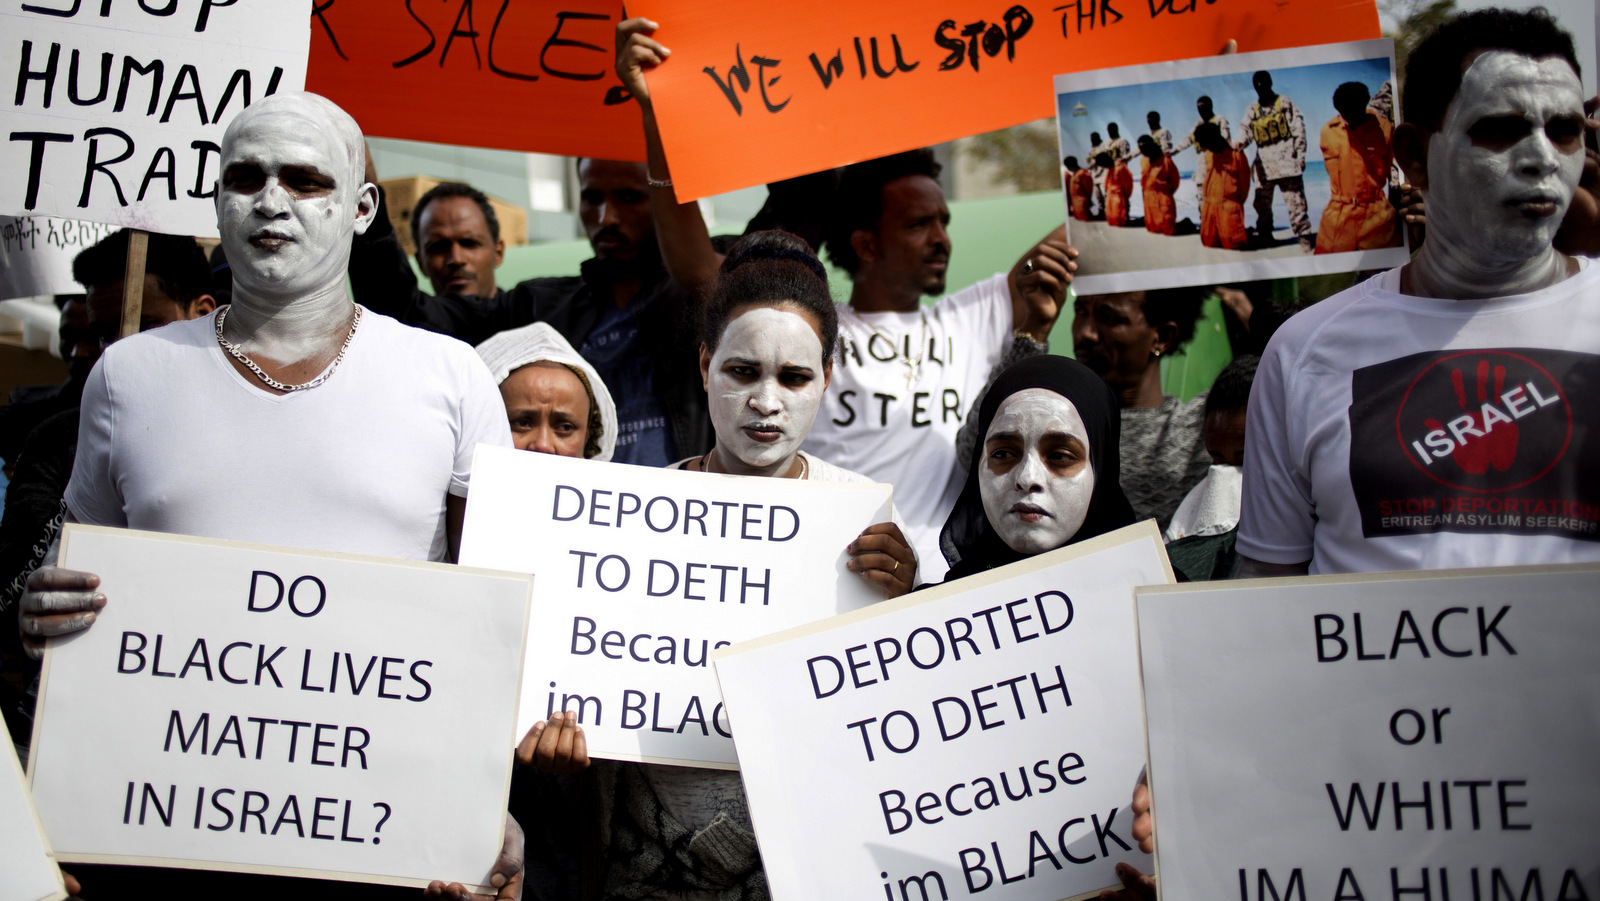 African migrants hold signs during a protest in front of Rwanda embassy in Herzeliya, Feb. 7, 2018. African refugess are protesting an Israeli plan to forcefully deport them. Israel has given 60 days to accept an offer to leave the country for an unknown African destination in exchange for $3,500 and a plane ticket. Those who don't by April 1 will be jailed indefinitely. (AP/Ariel Schalit)